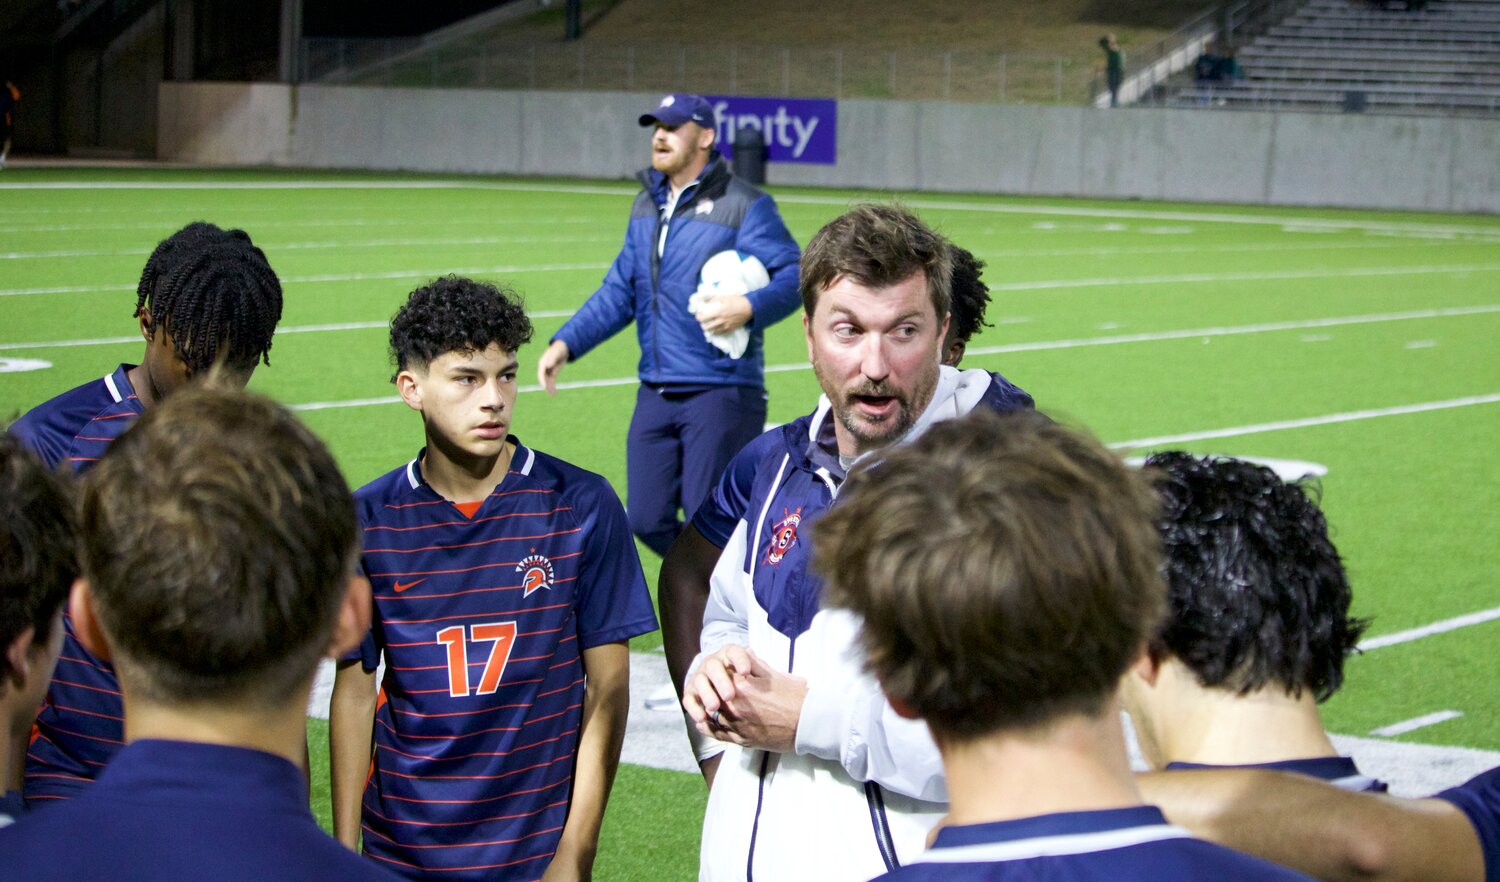 Seven Lakes head coach Jimmy Krueger talks to his team Friday’s game between Seven Lakes and Jordan at Legacy Stadium.